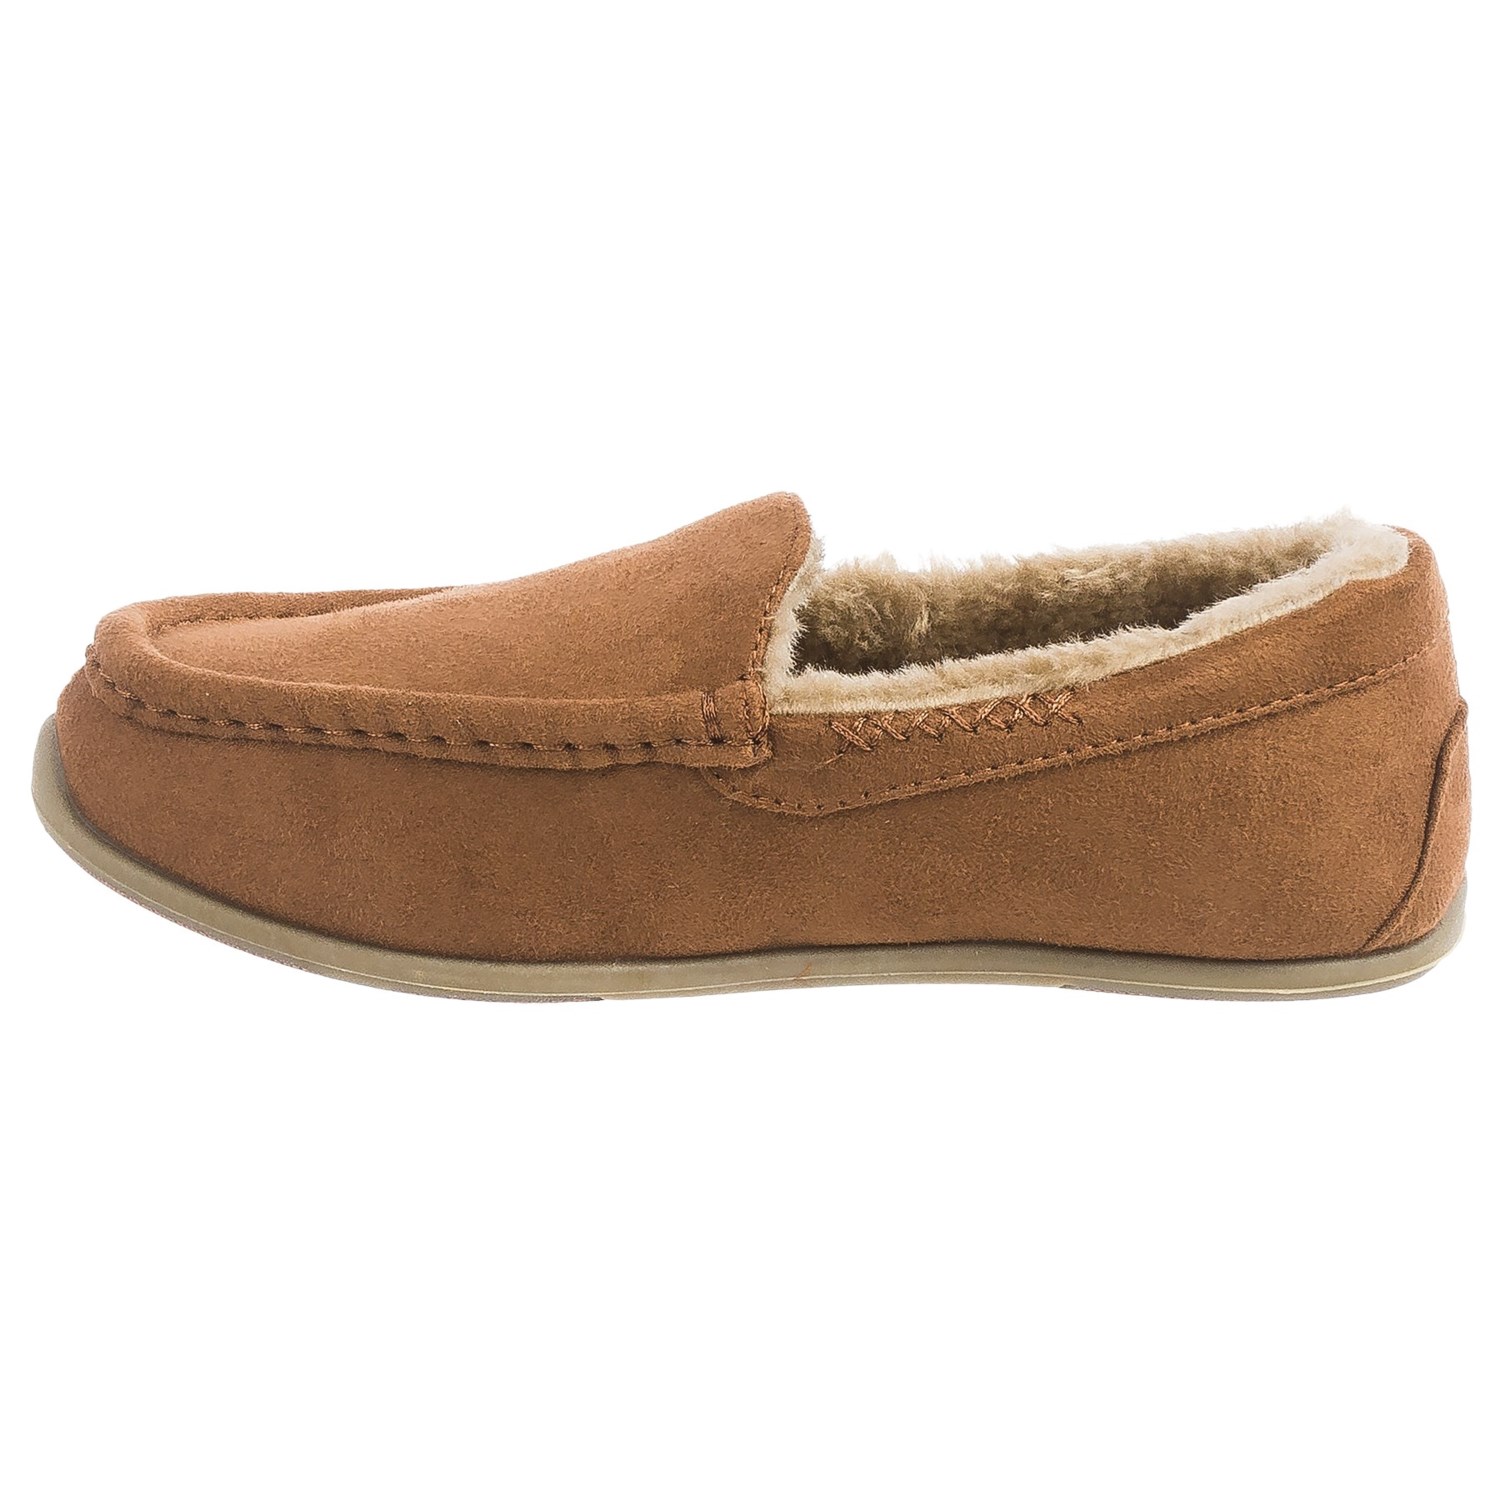 Deer Stags Birch Slippers (For Women) - Save 77%